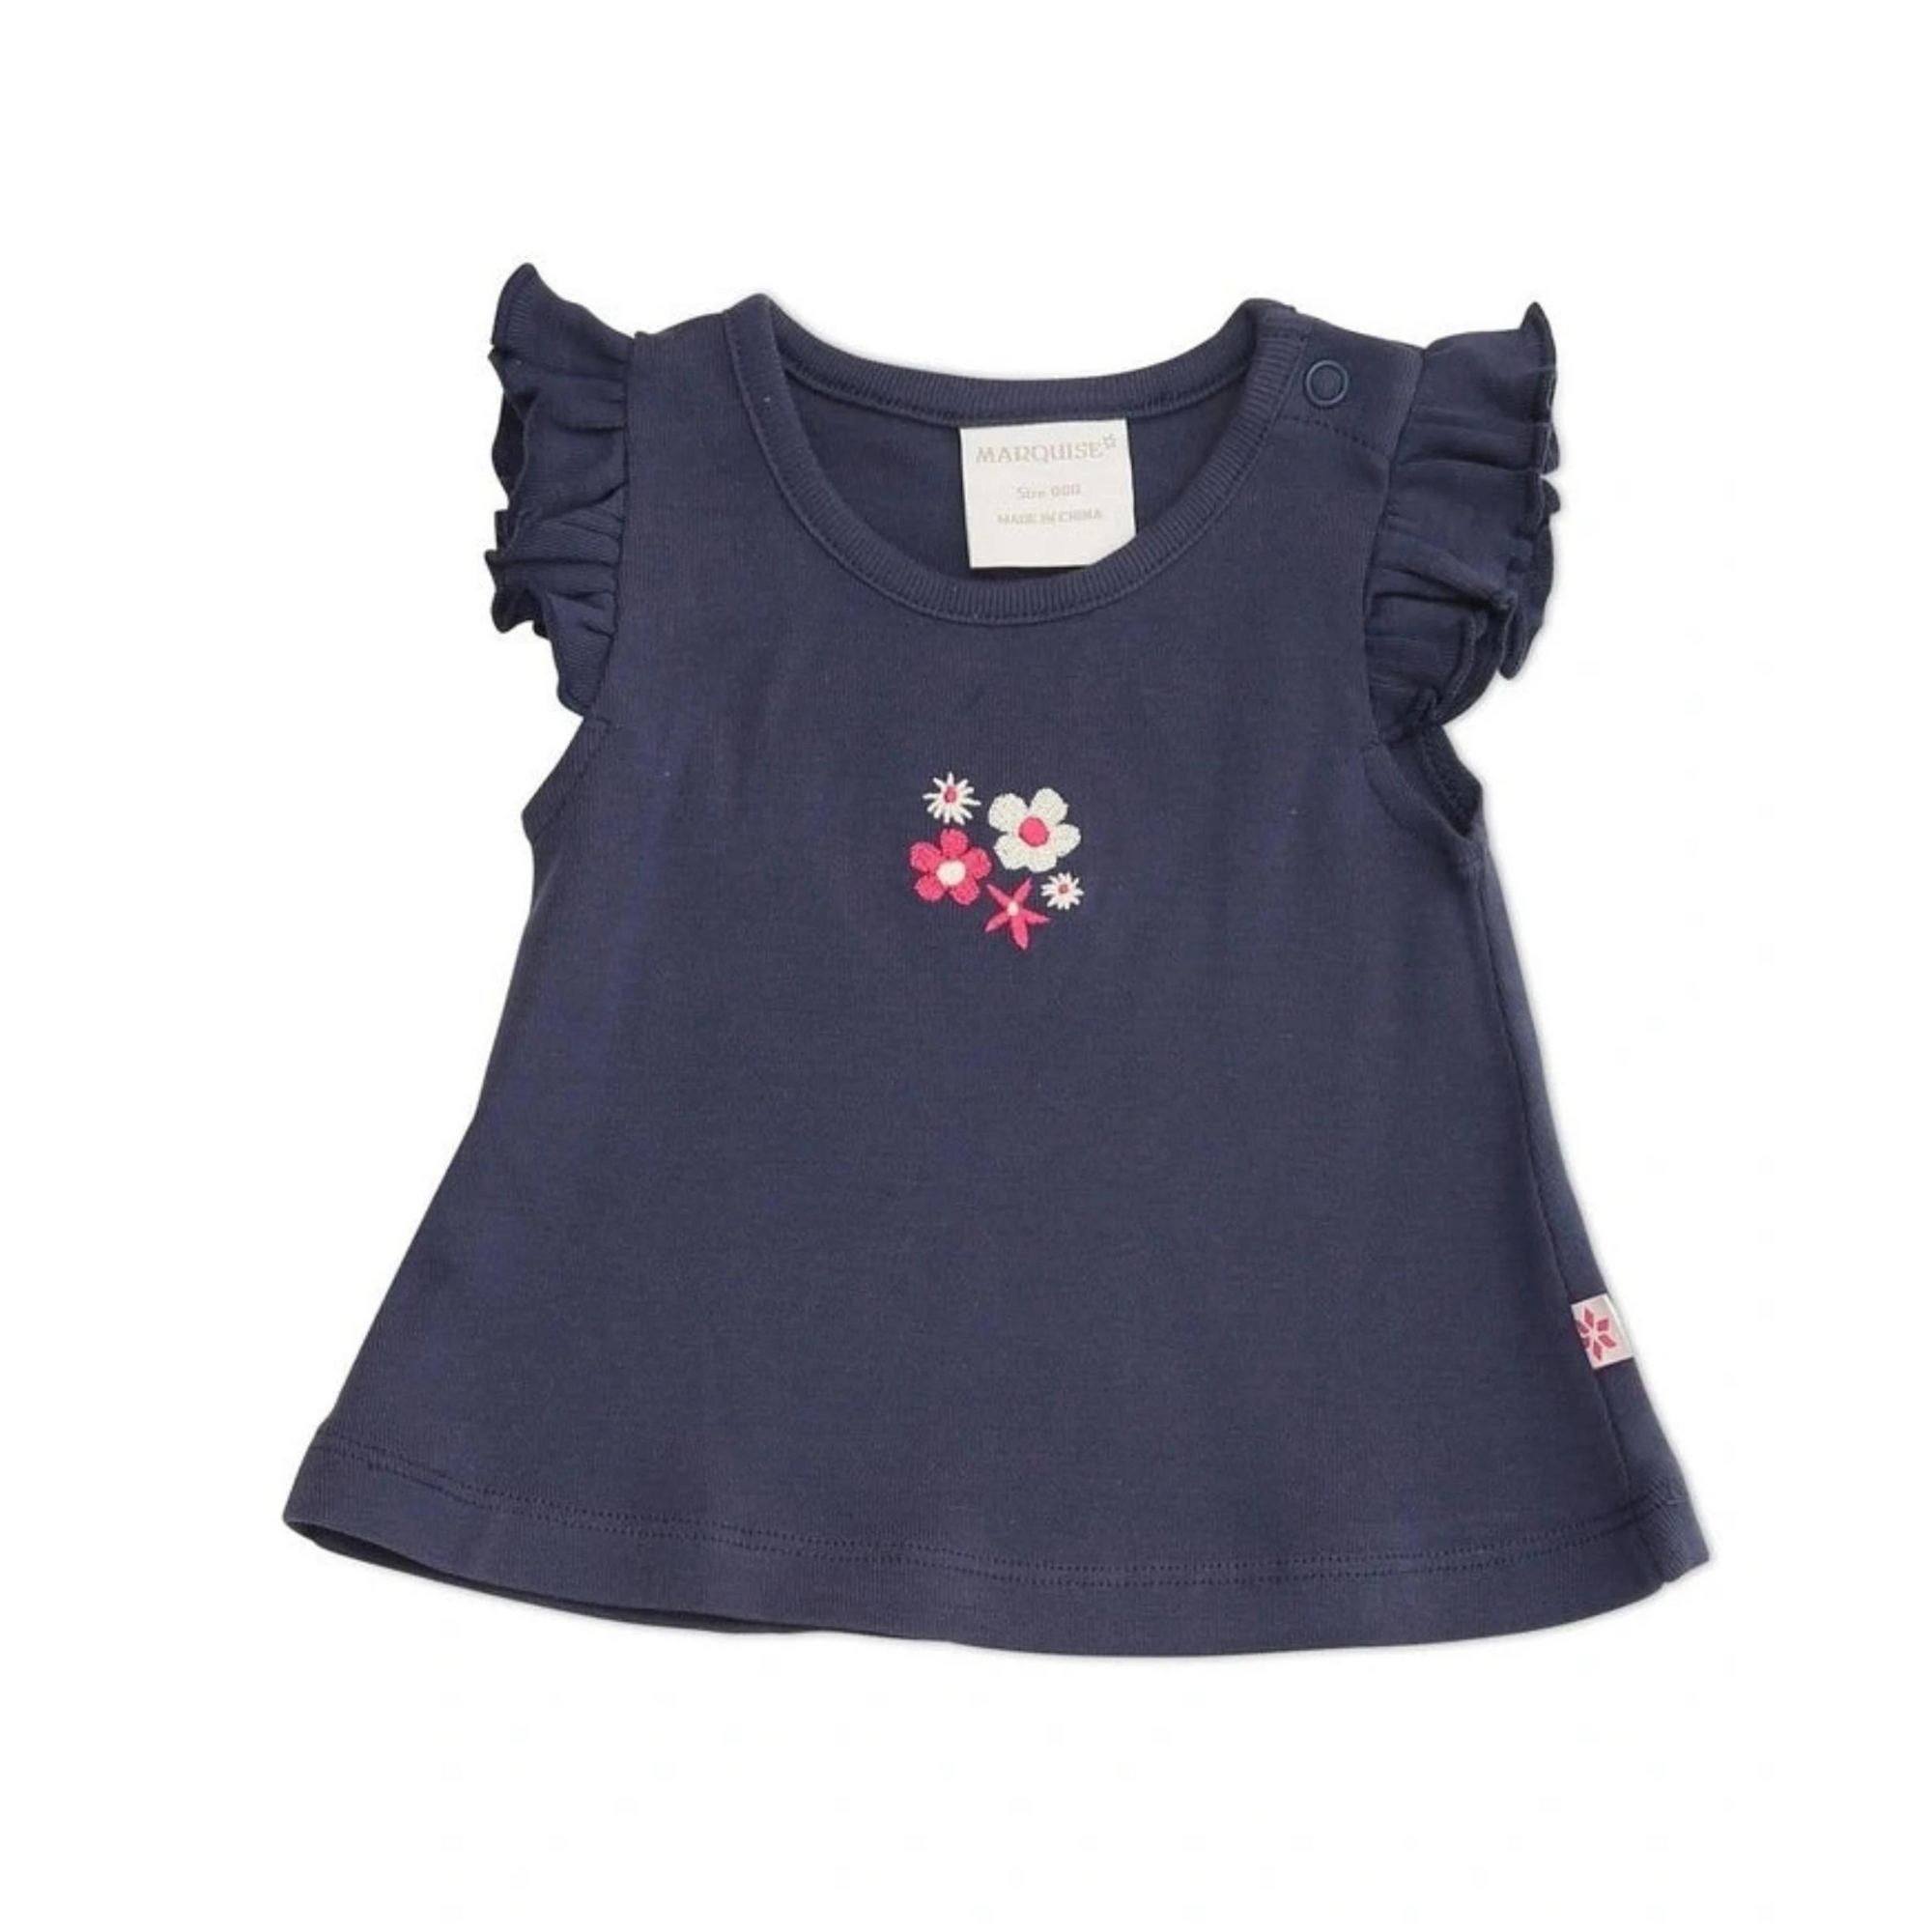 Marquise Girls Navy Top and Floral Set